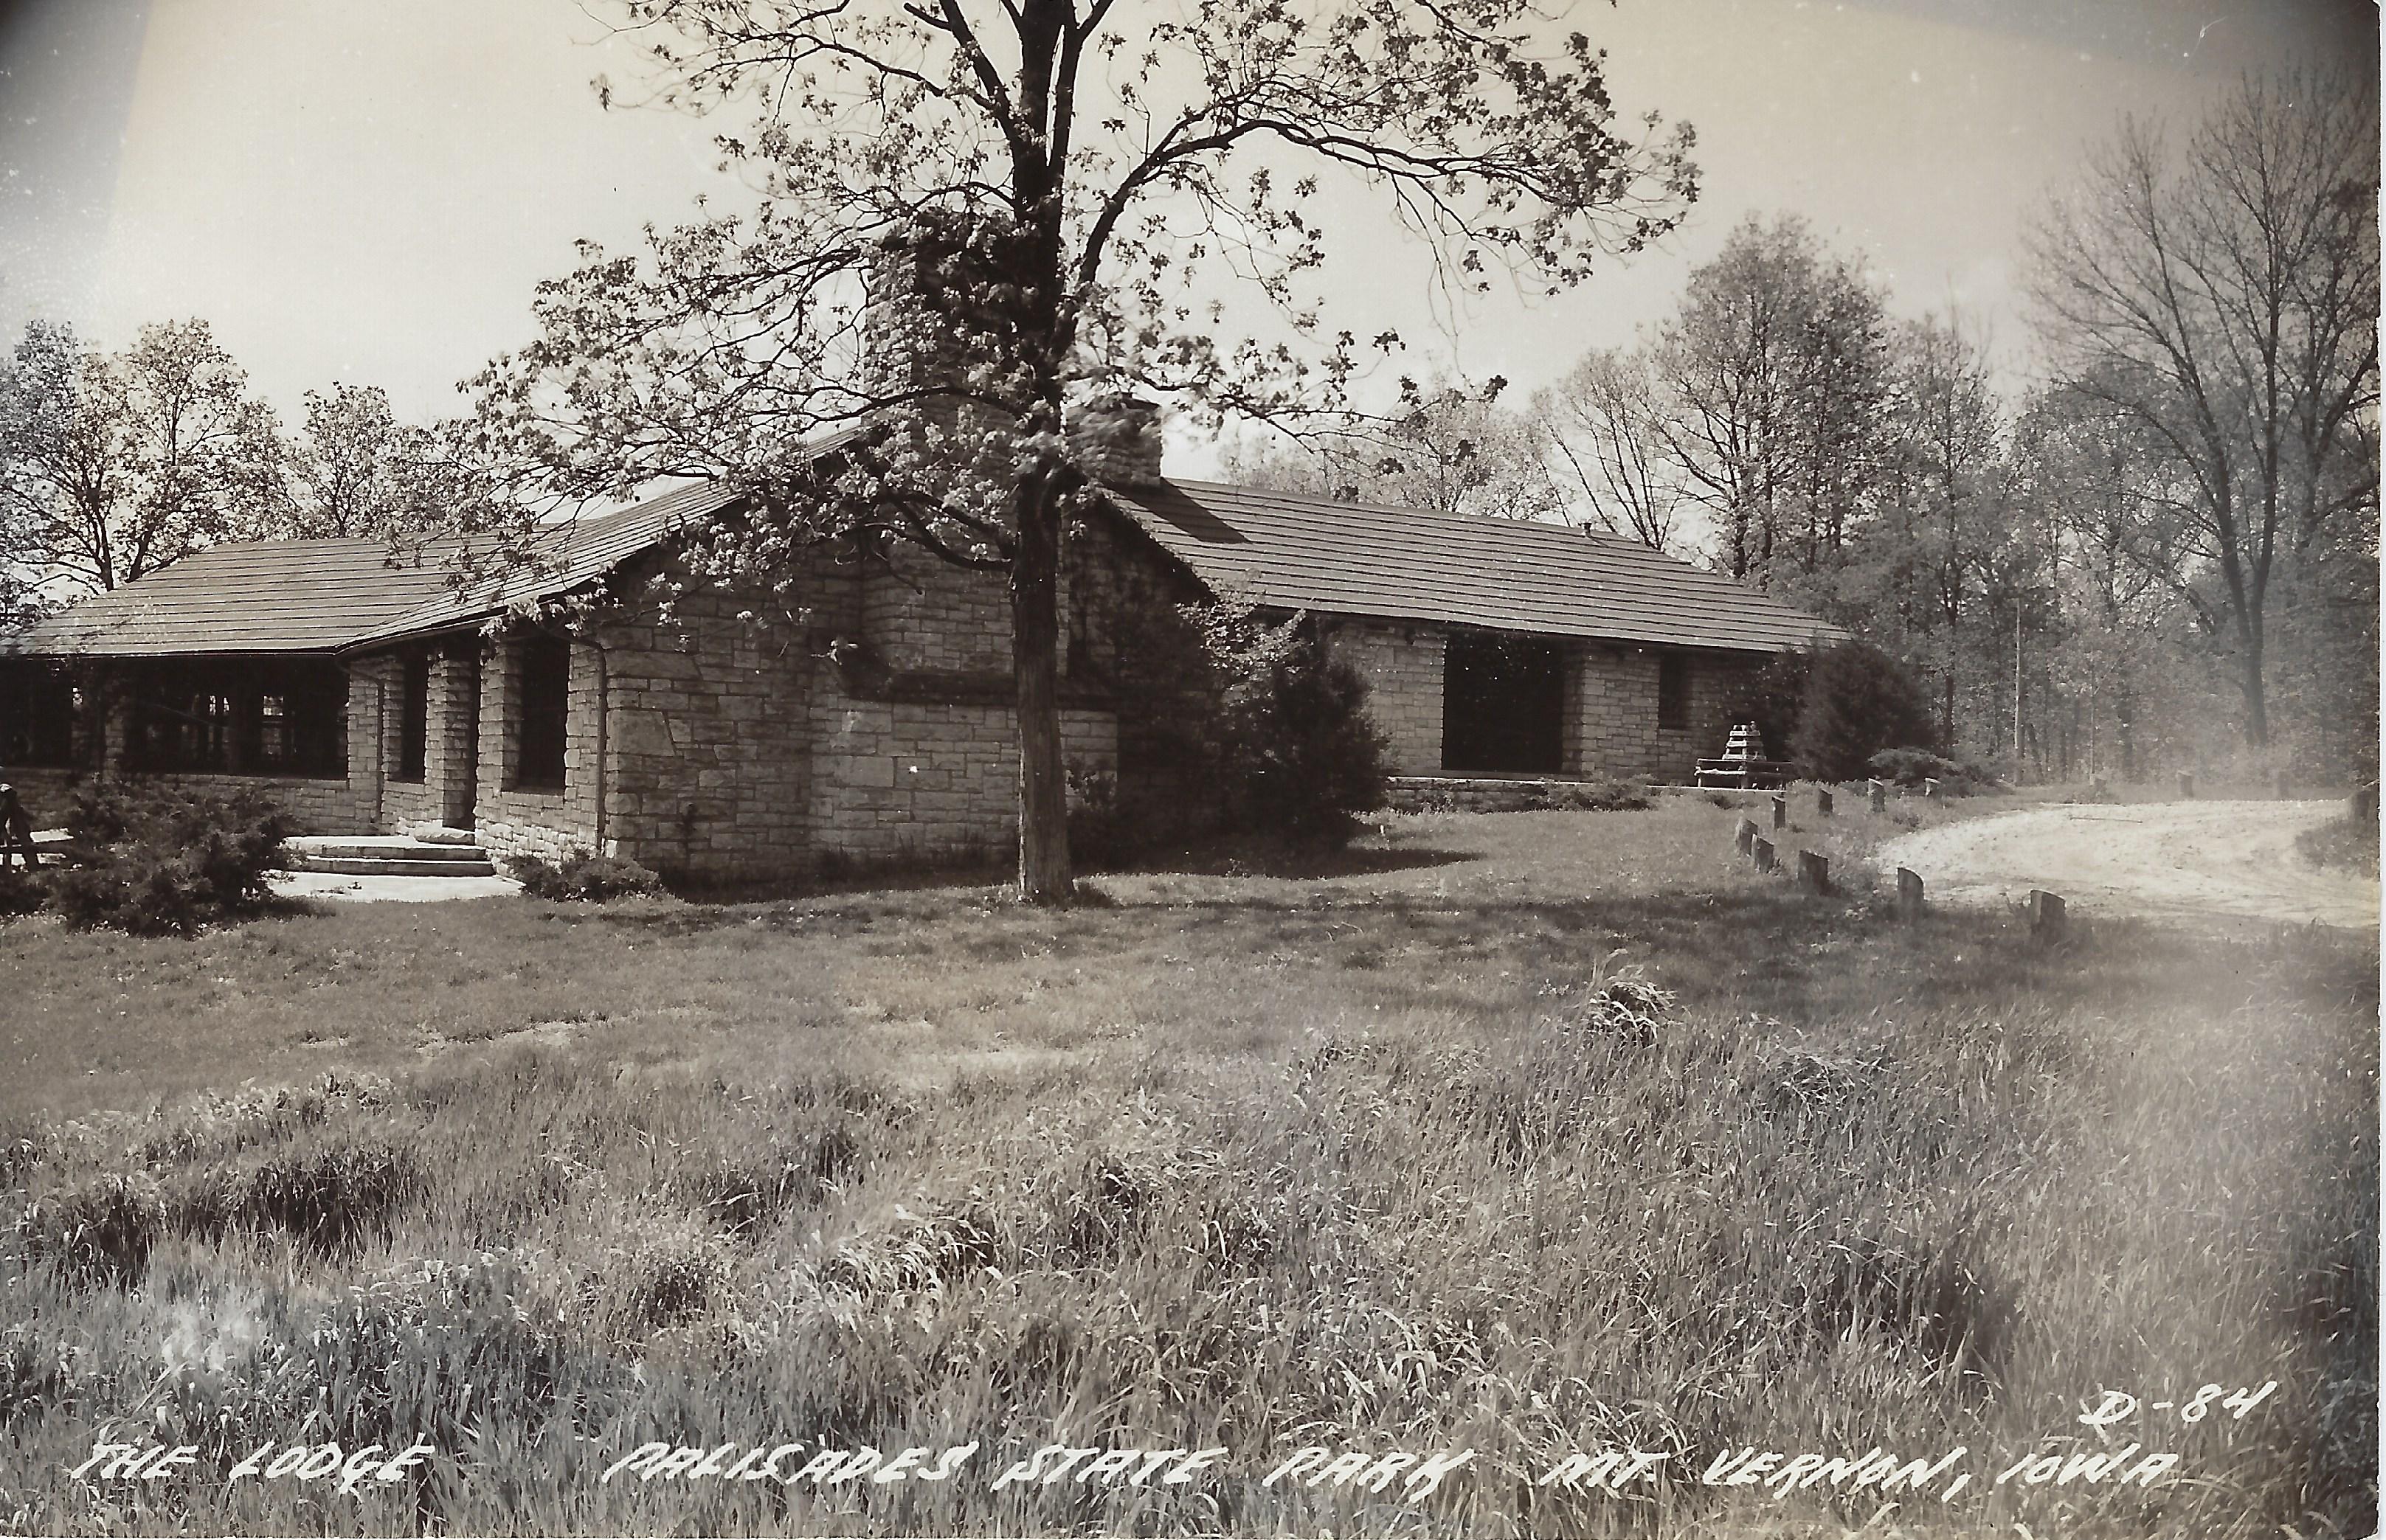 Photo of the Lodge in the Palisades postcard